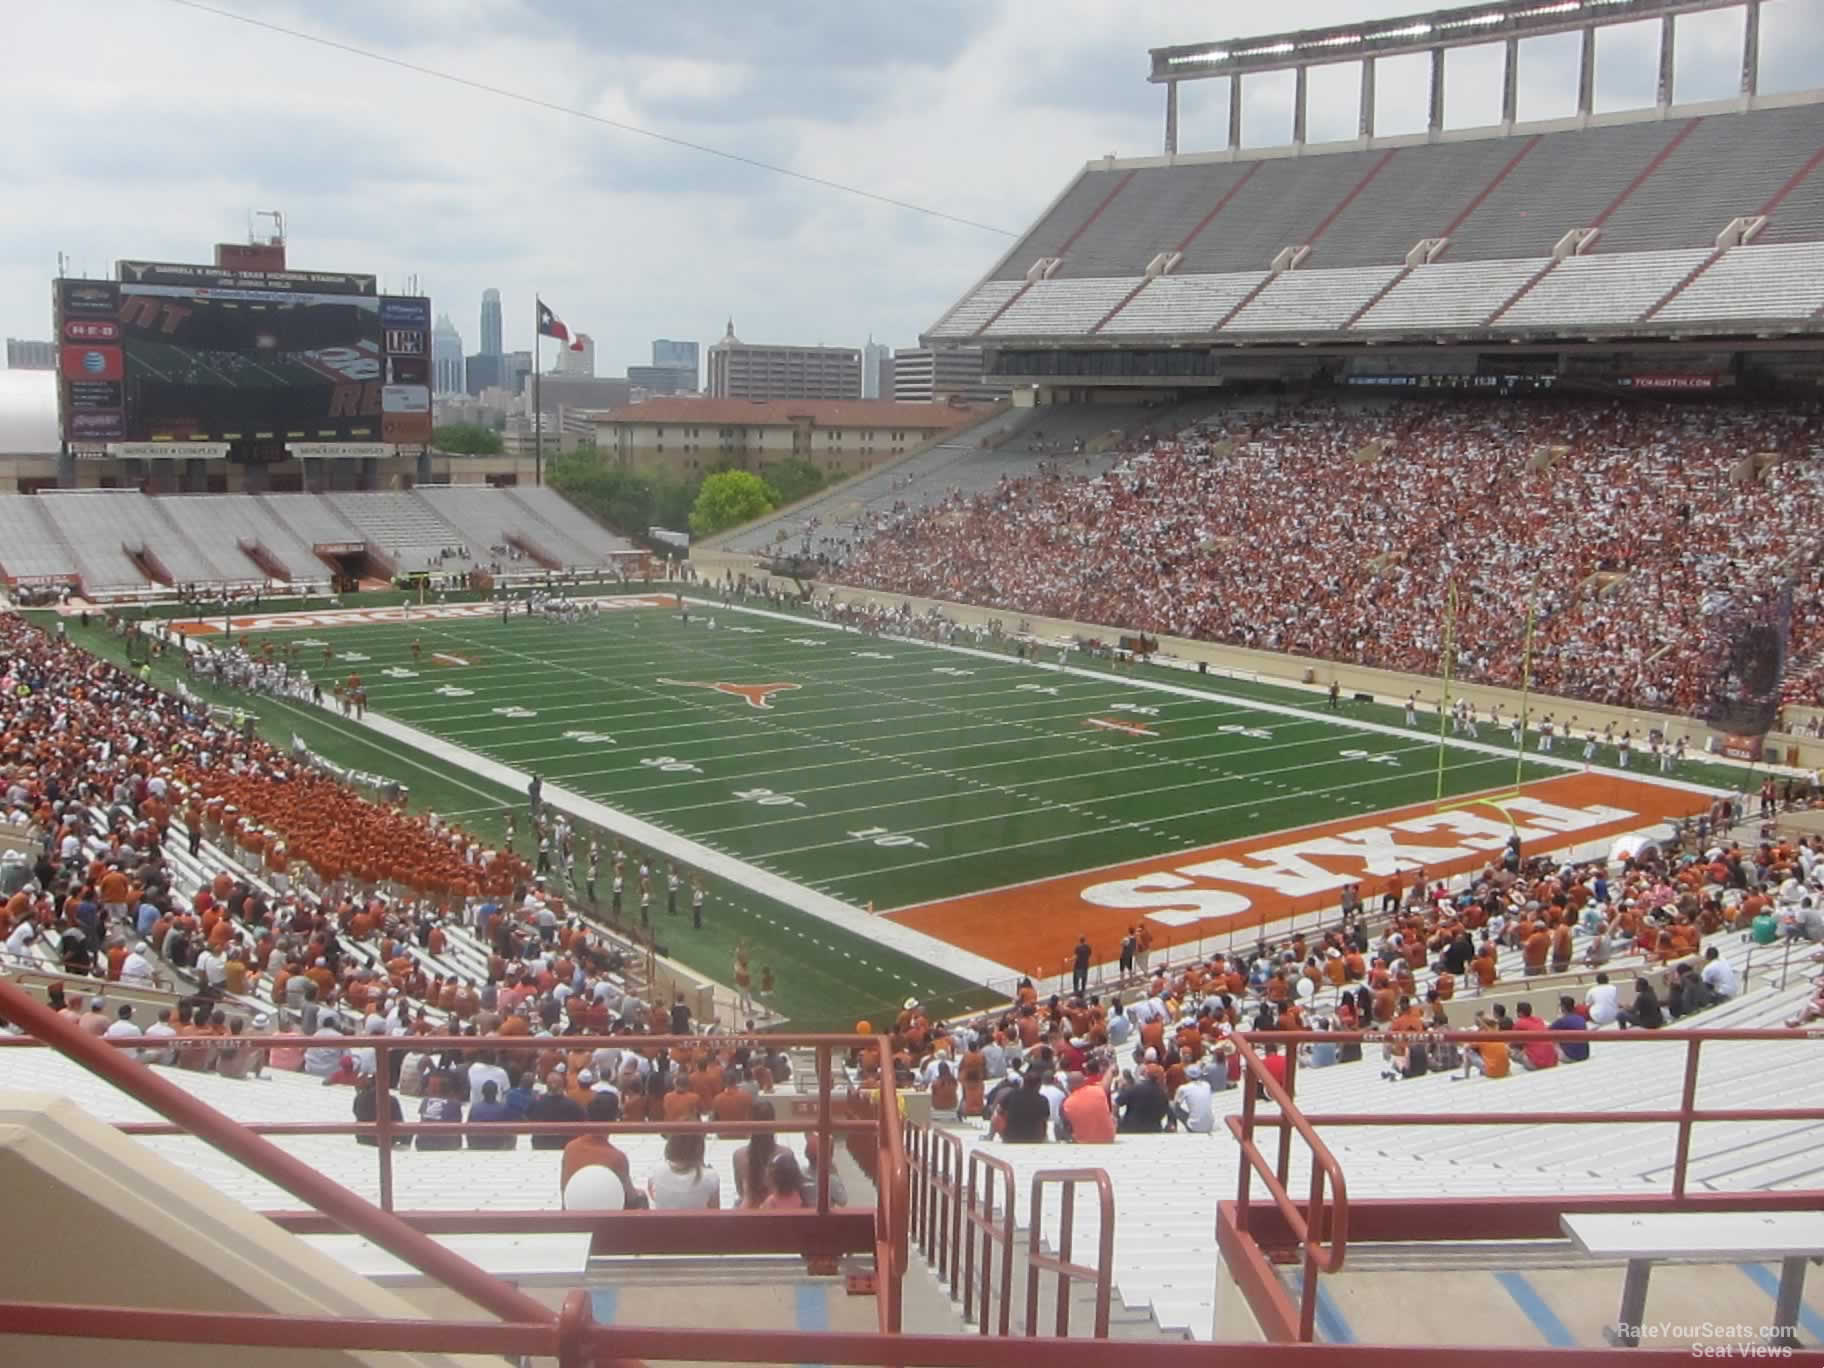 section 19, row 55 seat view  - dkr-texas memorial stadium